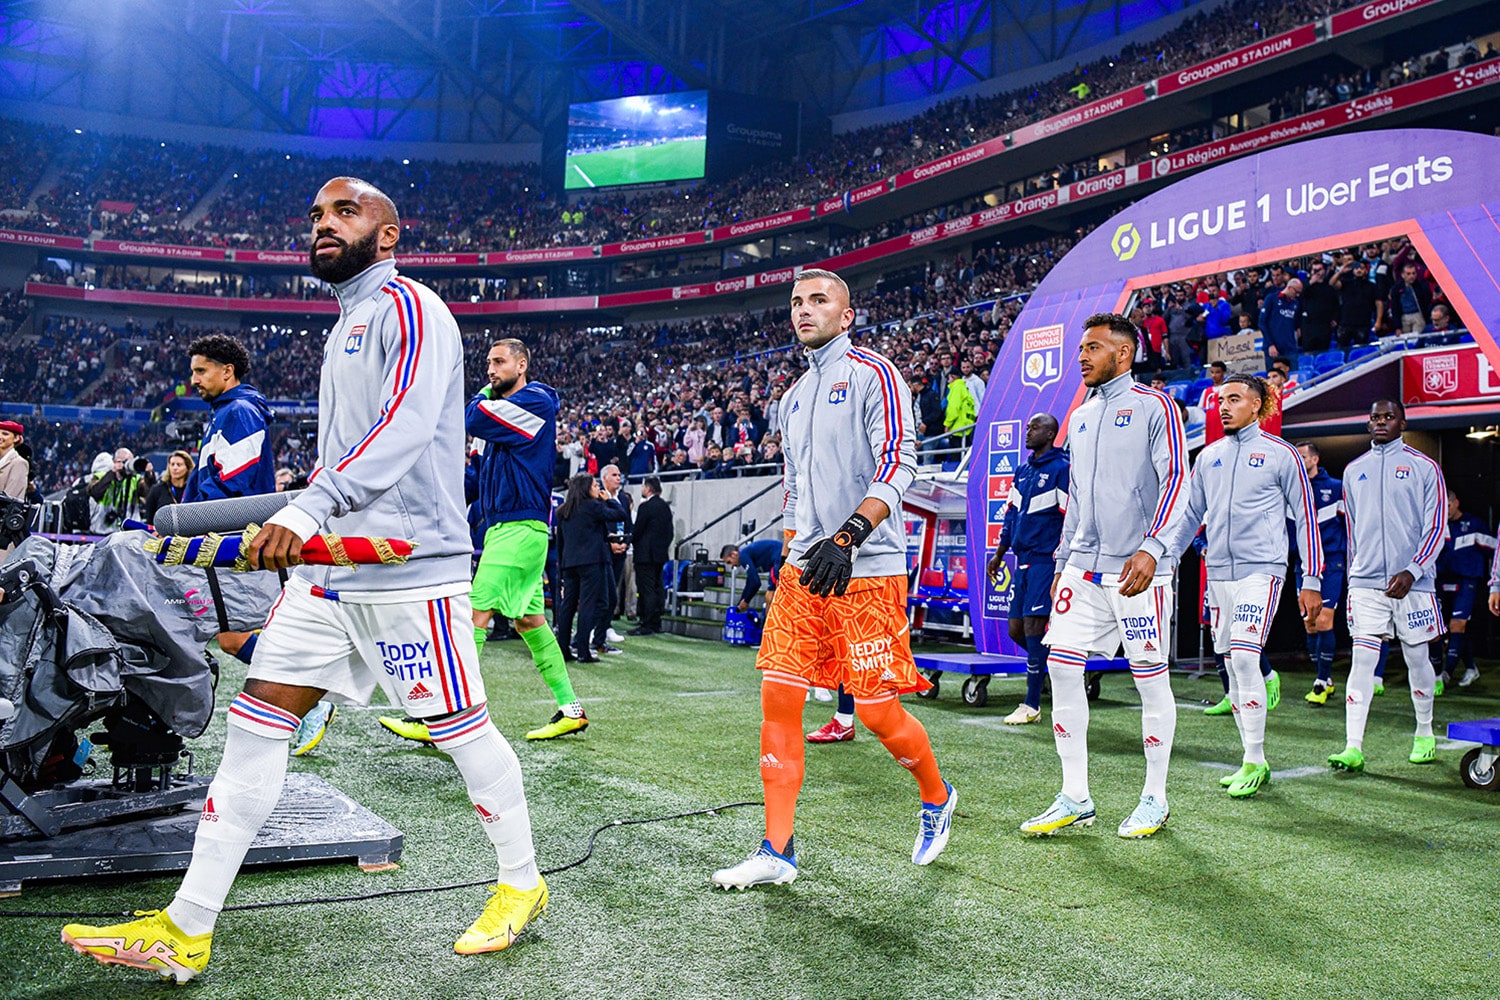 Olympique Lyonnais players walk out of tunnel before league game